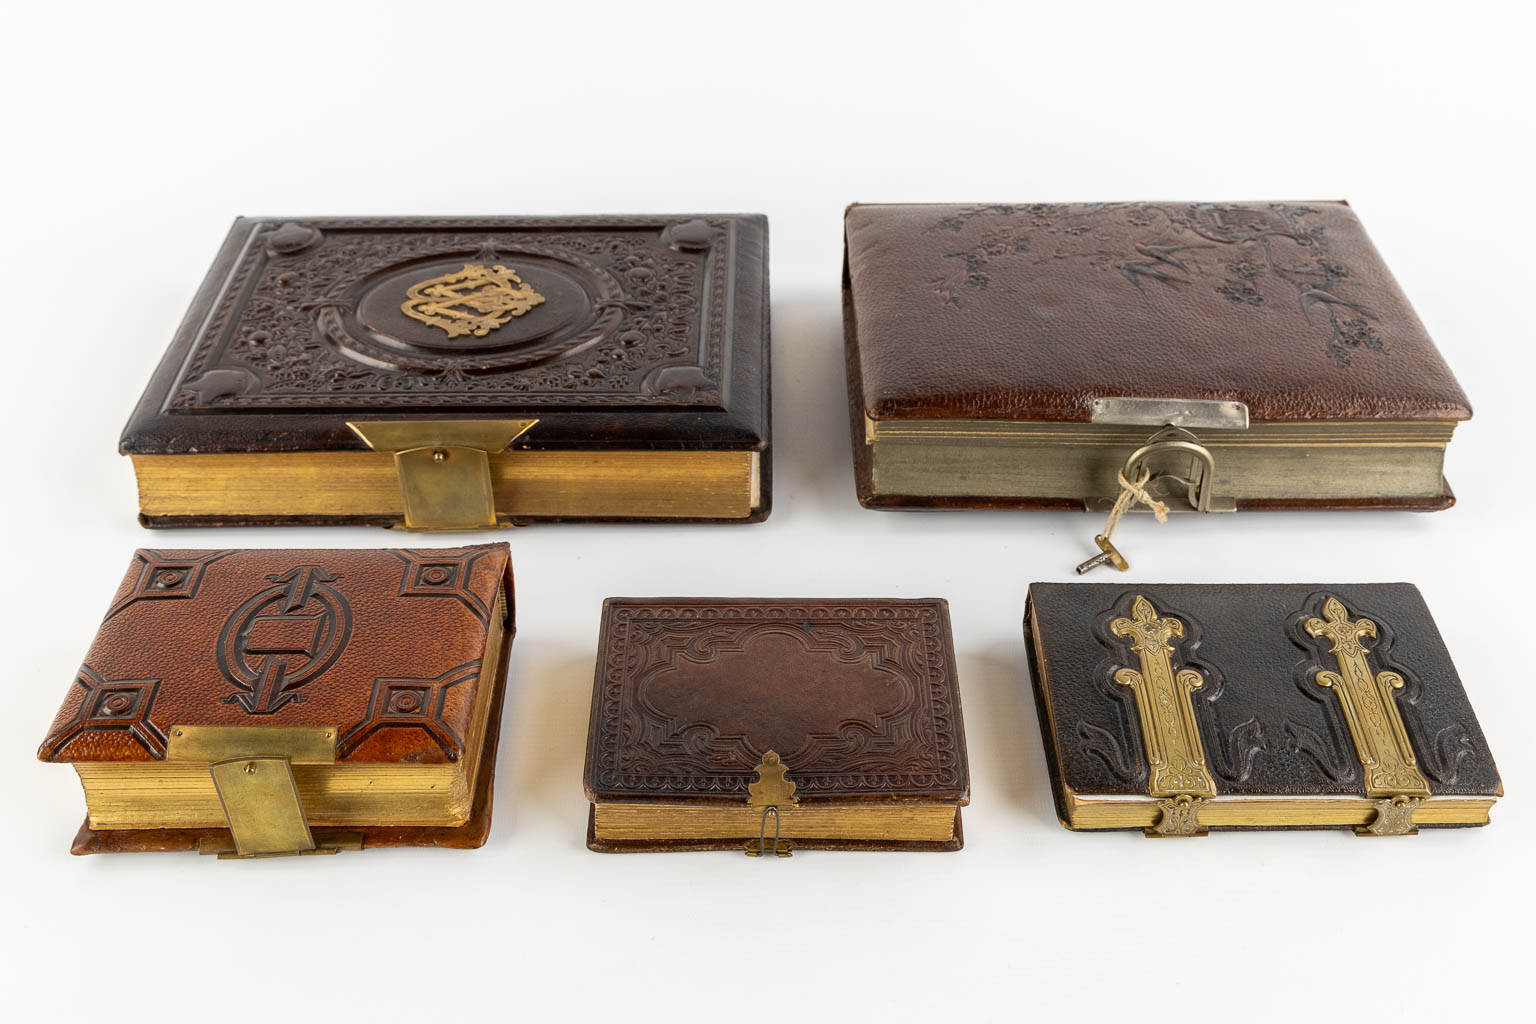 Five family photo books, of which 1 has a music box. (W:24 x H:30 cm)